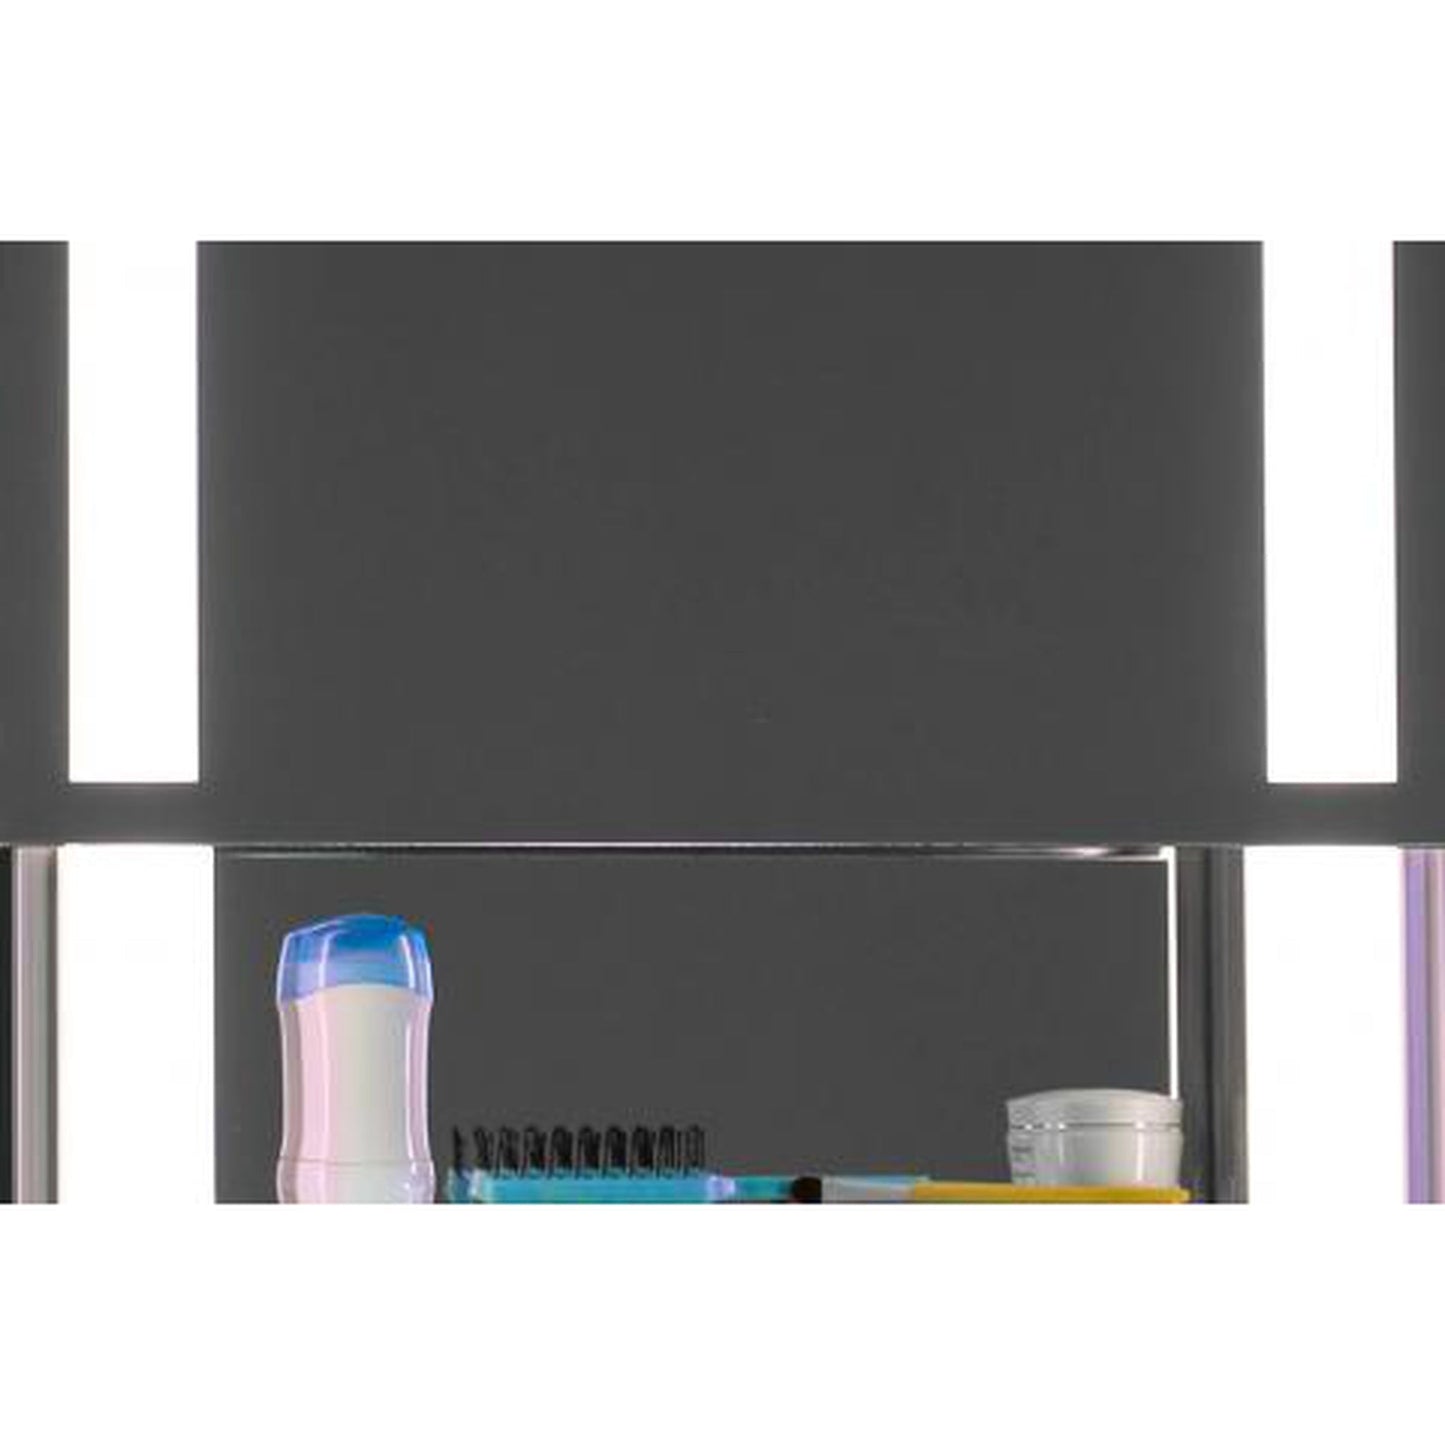 Sidler SideLight 31" x 29" 3000K Single Gliding Mirror Door Anodized Aluminum Medicine Cabinet With Built-in GFCI Outlet and USB port